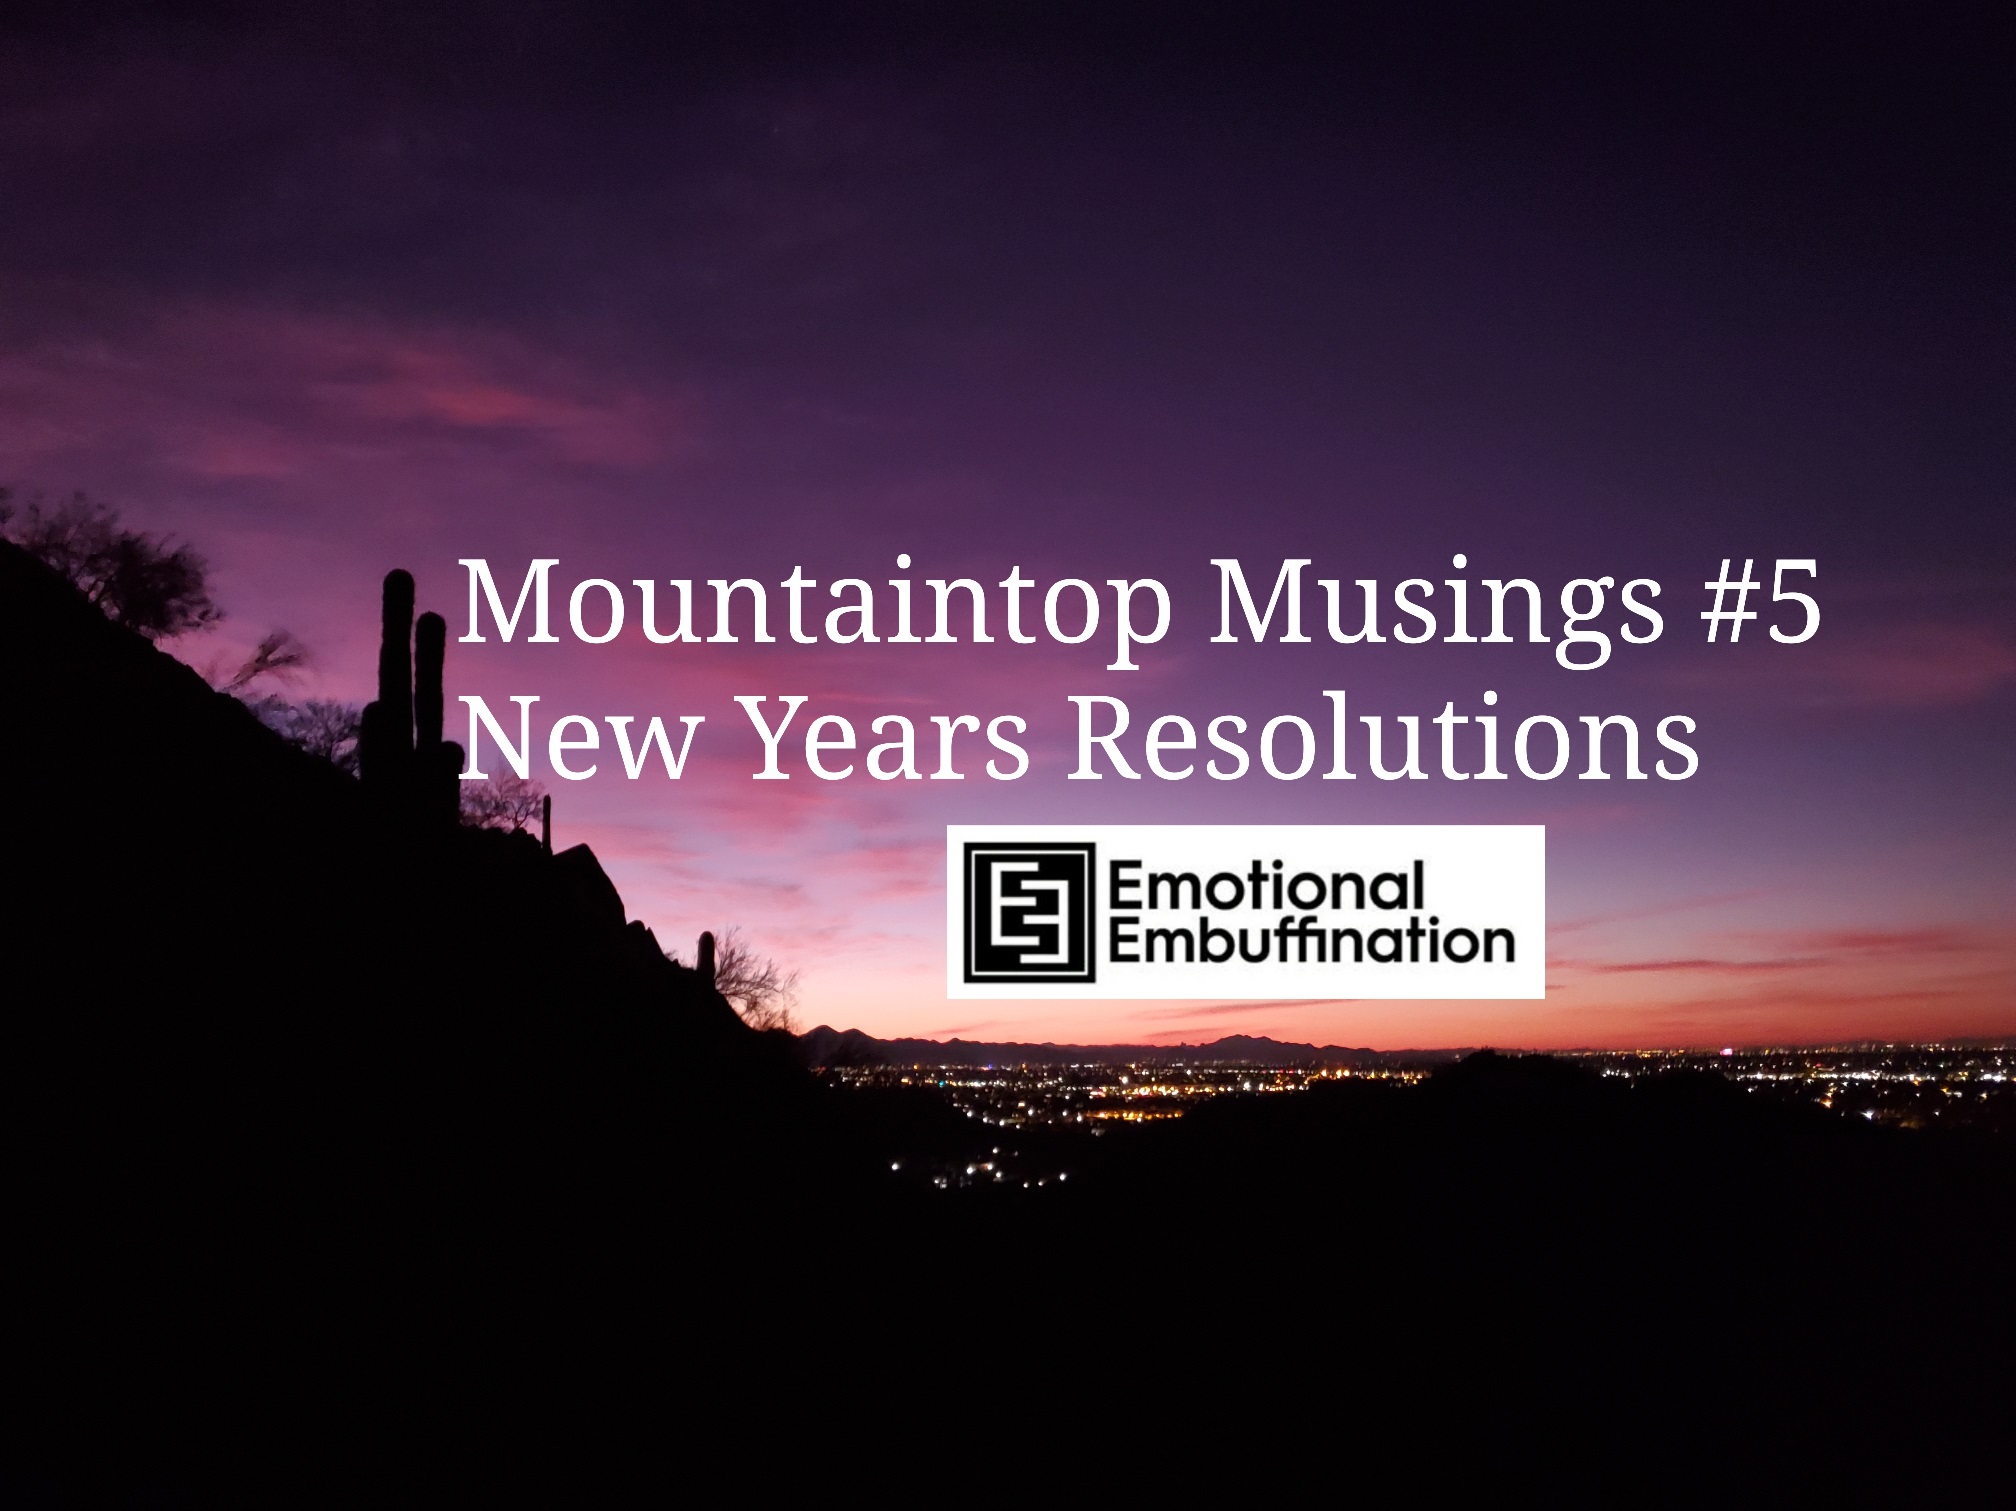 New Years Resolutions – Mountaintop Musings #5